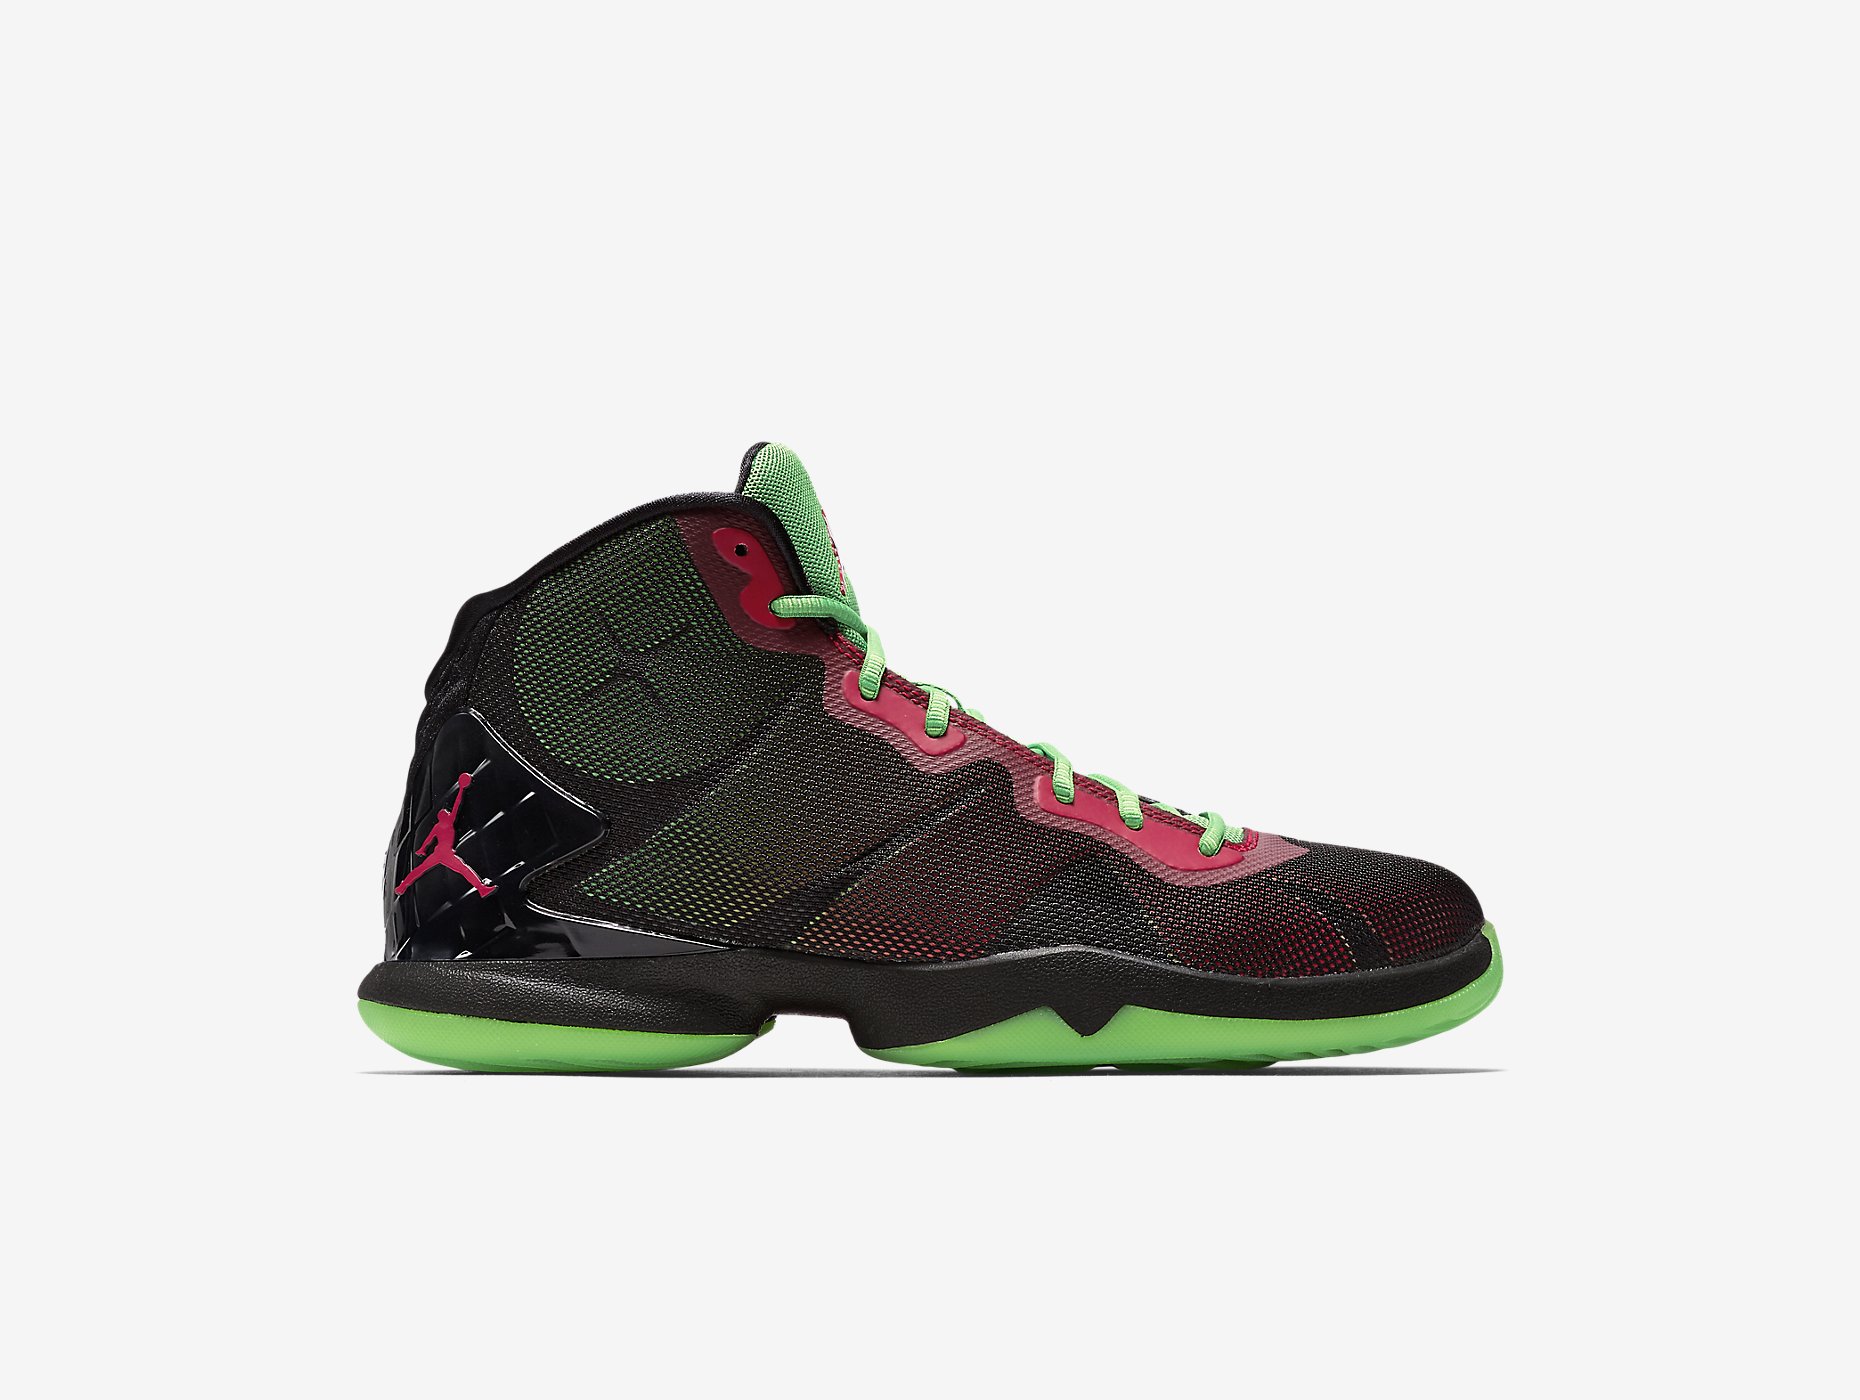 Air Jordan Super.Fly 4 'Marvin The Martian' - Available | SNEAKERS ADDICT